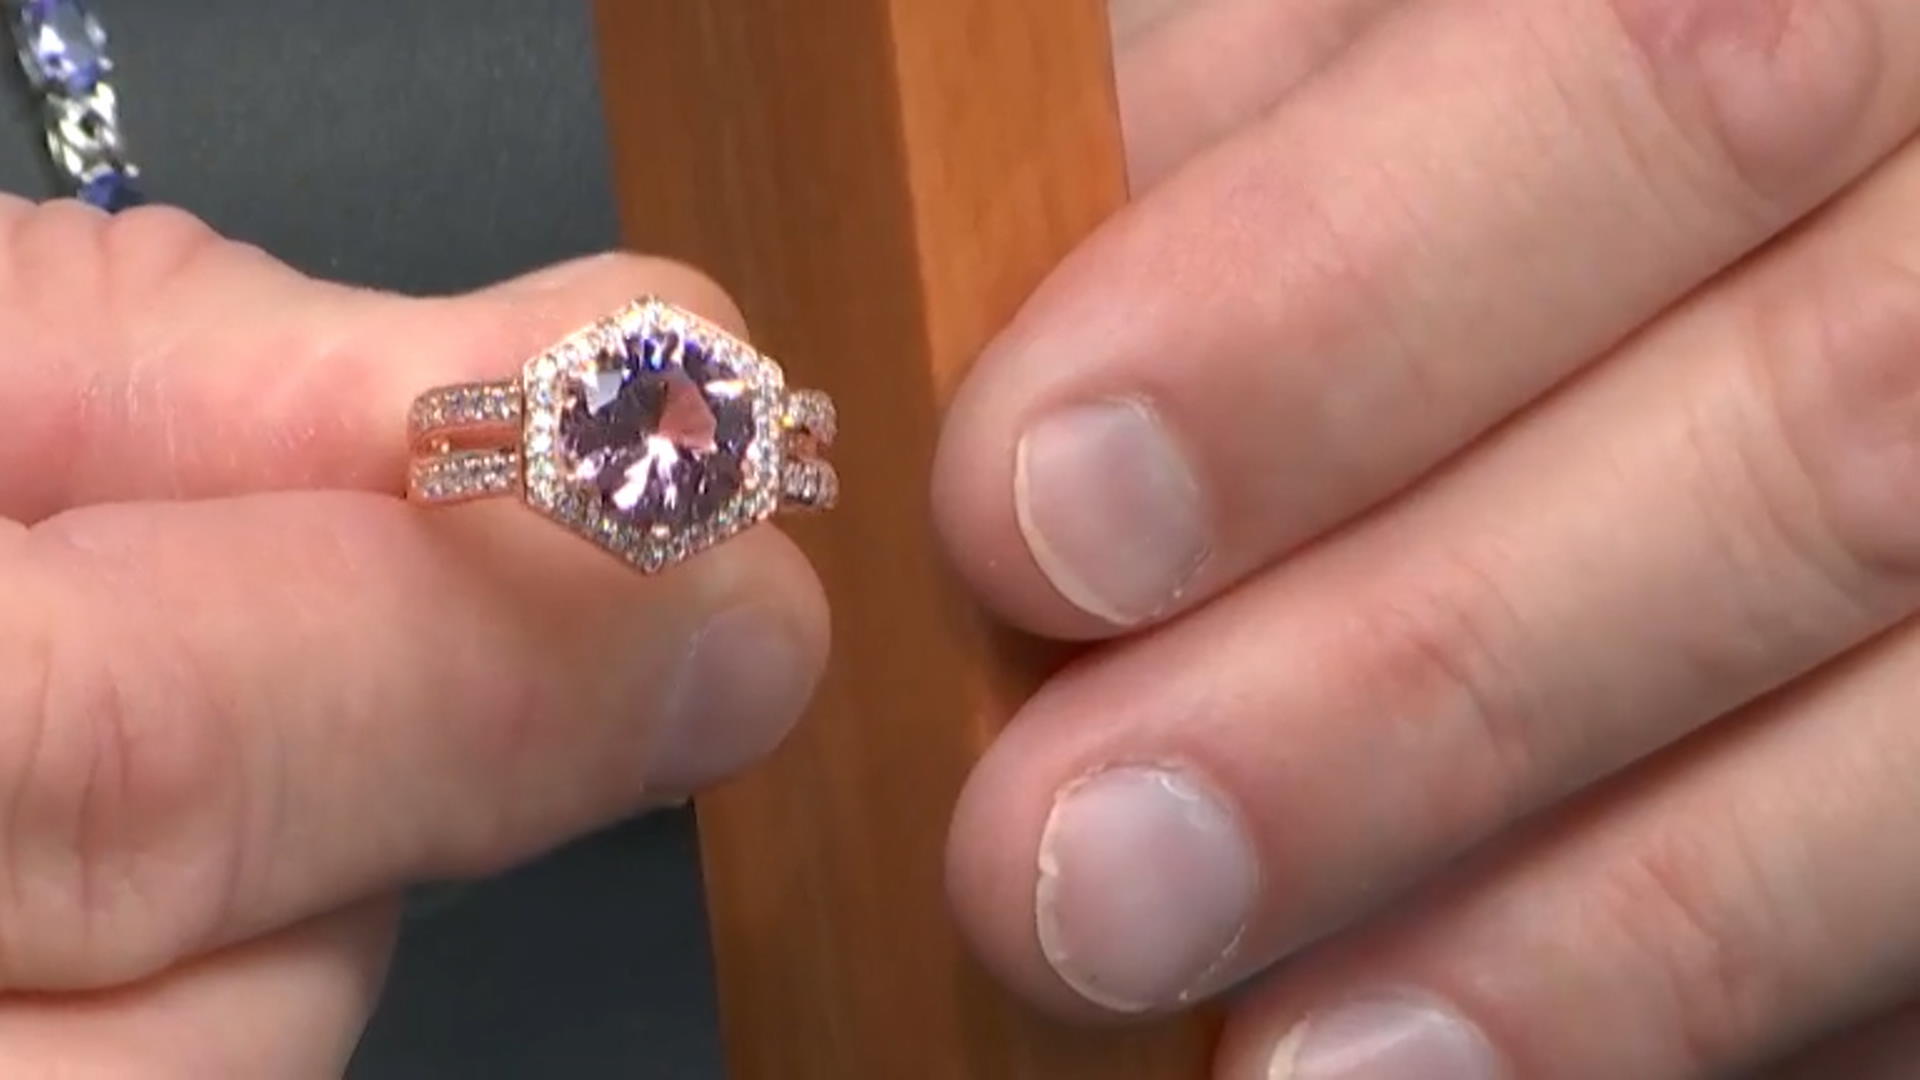 Pink and White Cubic Zirconia 18K Rose Gold Over Silver Ring Video Thumbnail